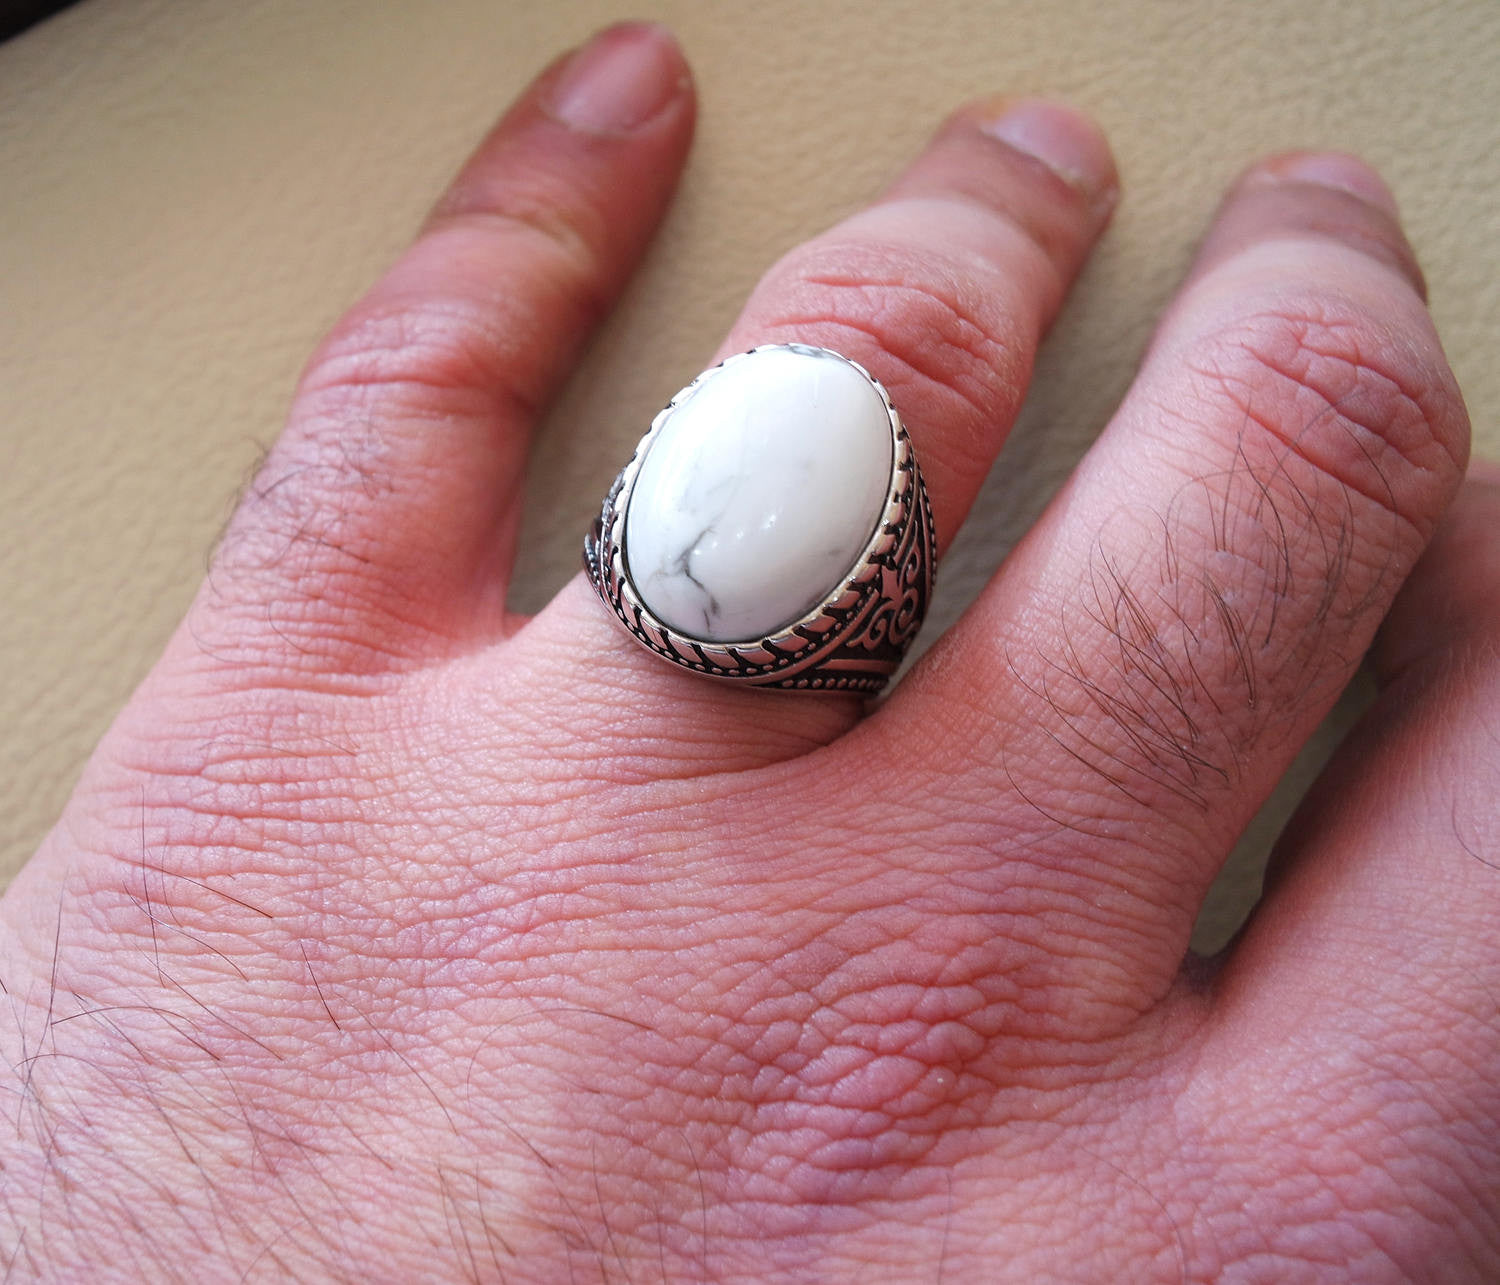 men ring white turquoise howalite  natural agate oval cabochon stone sterling silver 925 all sizes antique ottoman jewelry fast shipping